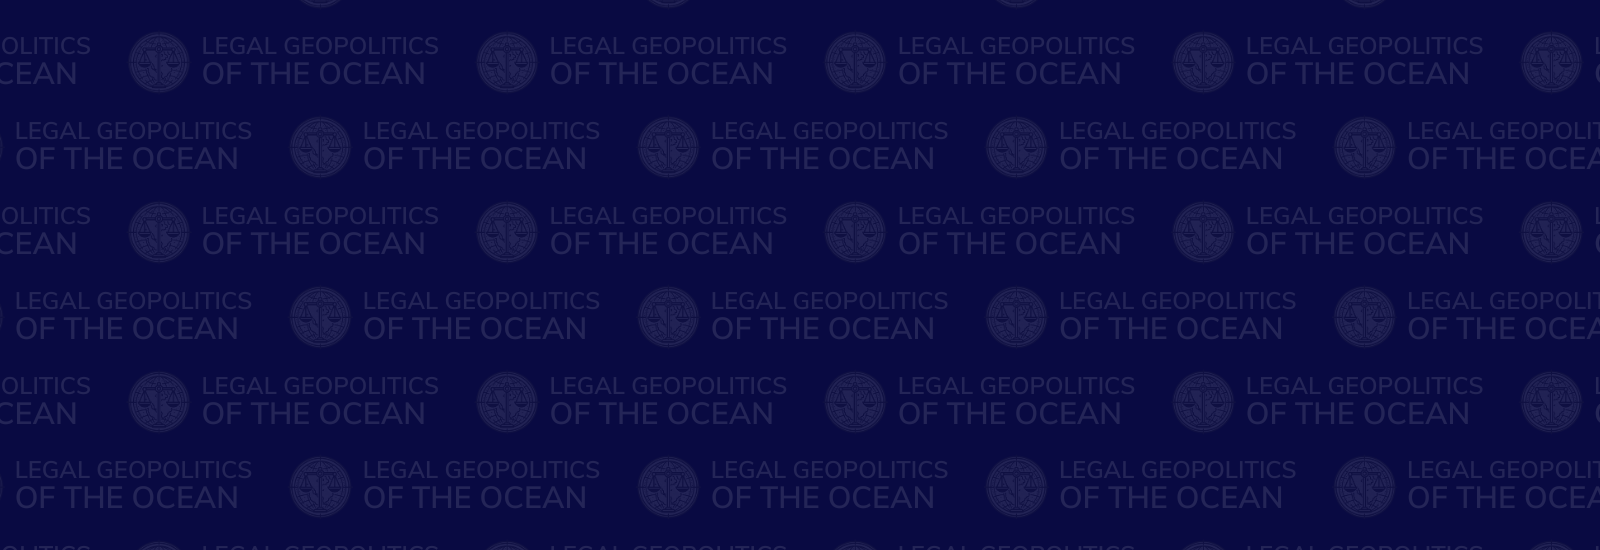 Legal geopolitics of the ocean logo repeating on a navy blue background